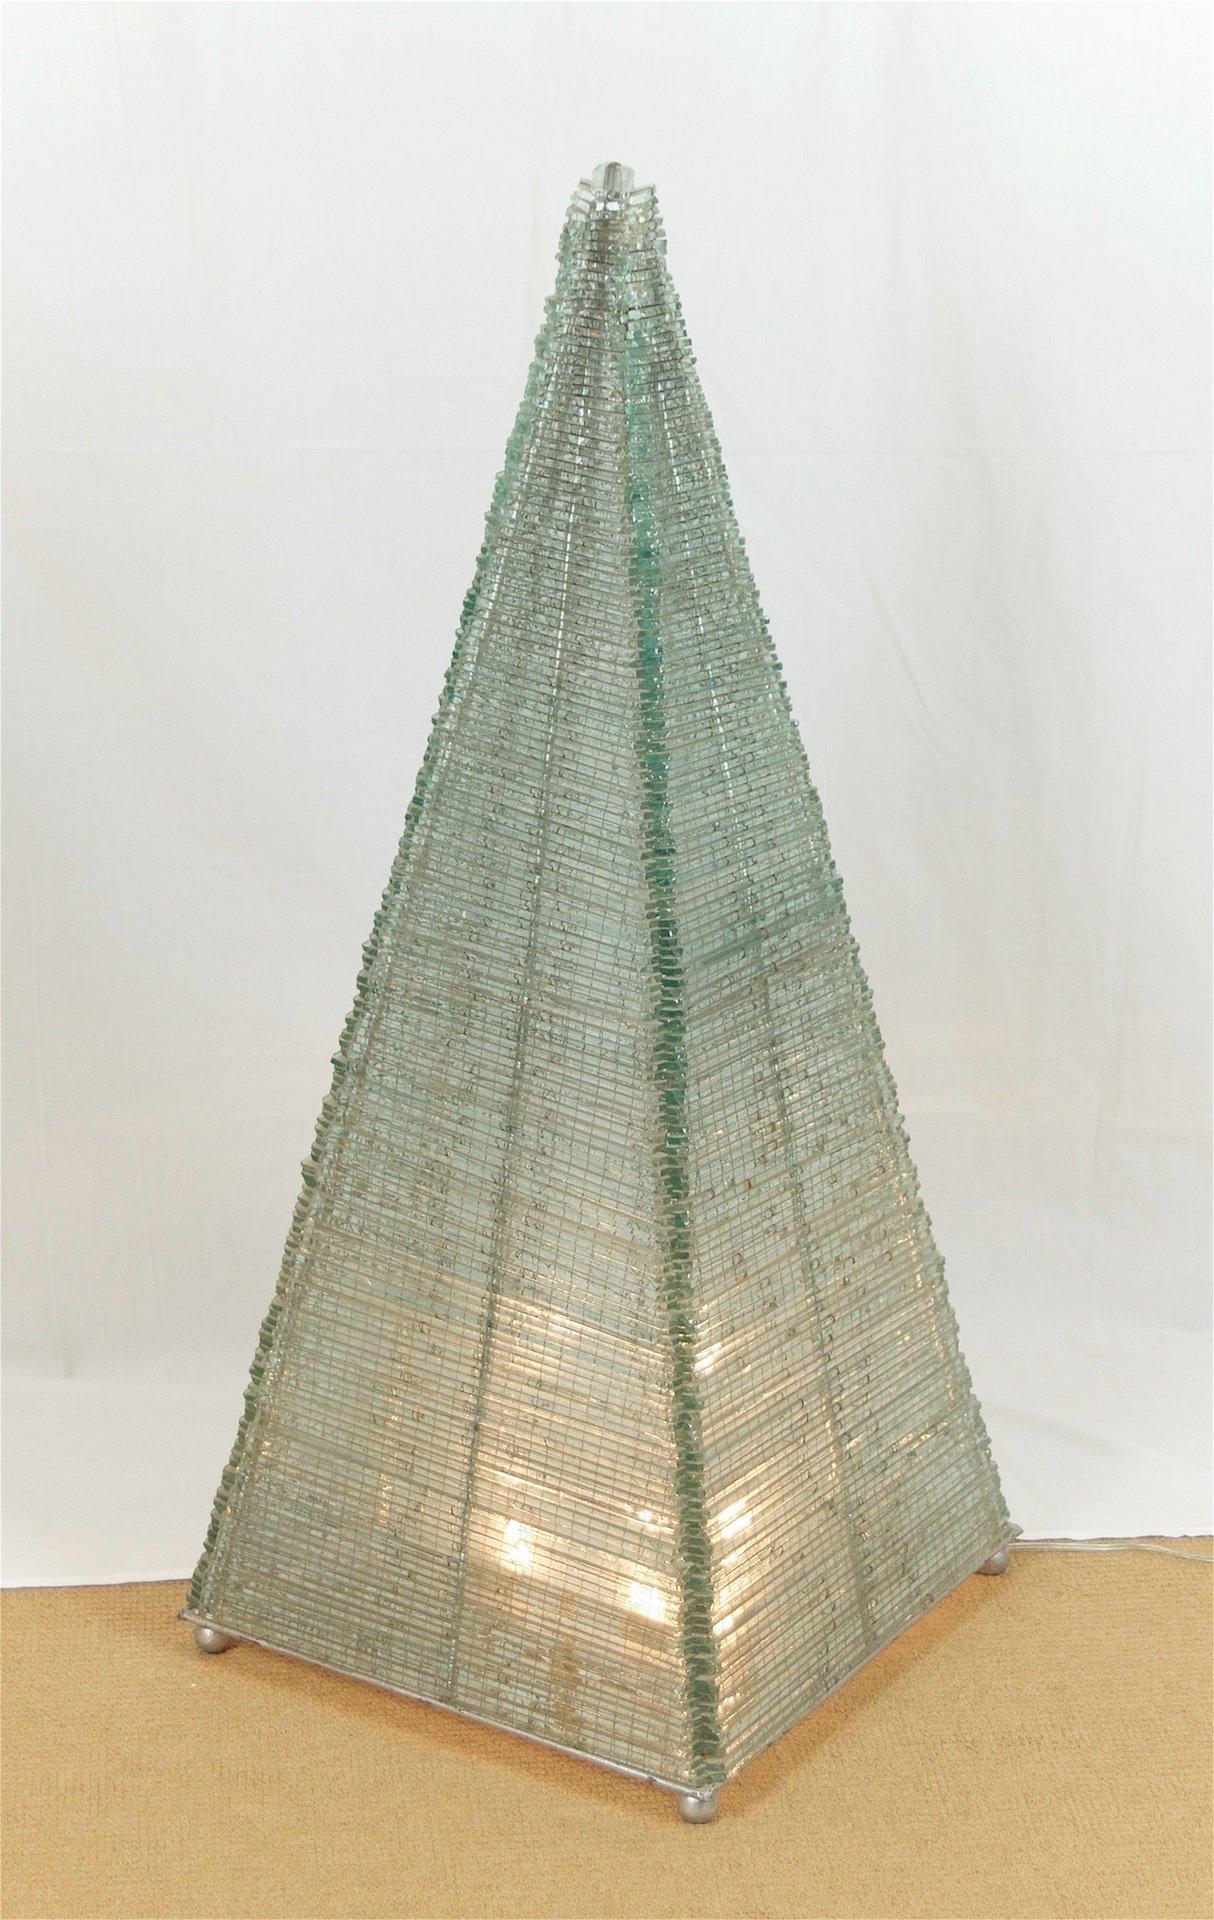 Dramatic and unusual light sculpture. Amazing detail with miniature elongated cubes of clear glass individually sewn to each other by thin silver wire. A wonderful one-of-a-kind piece.